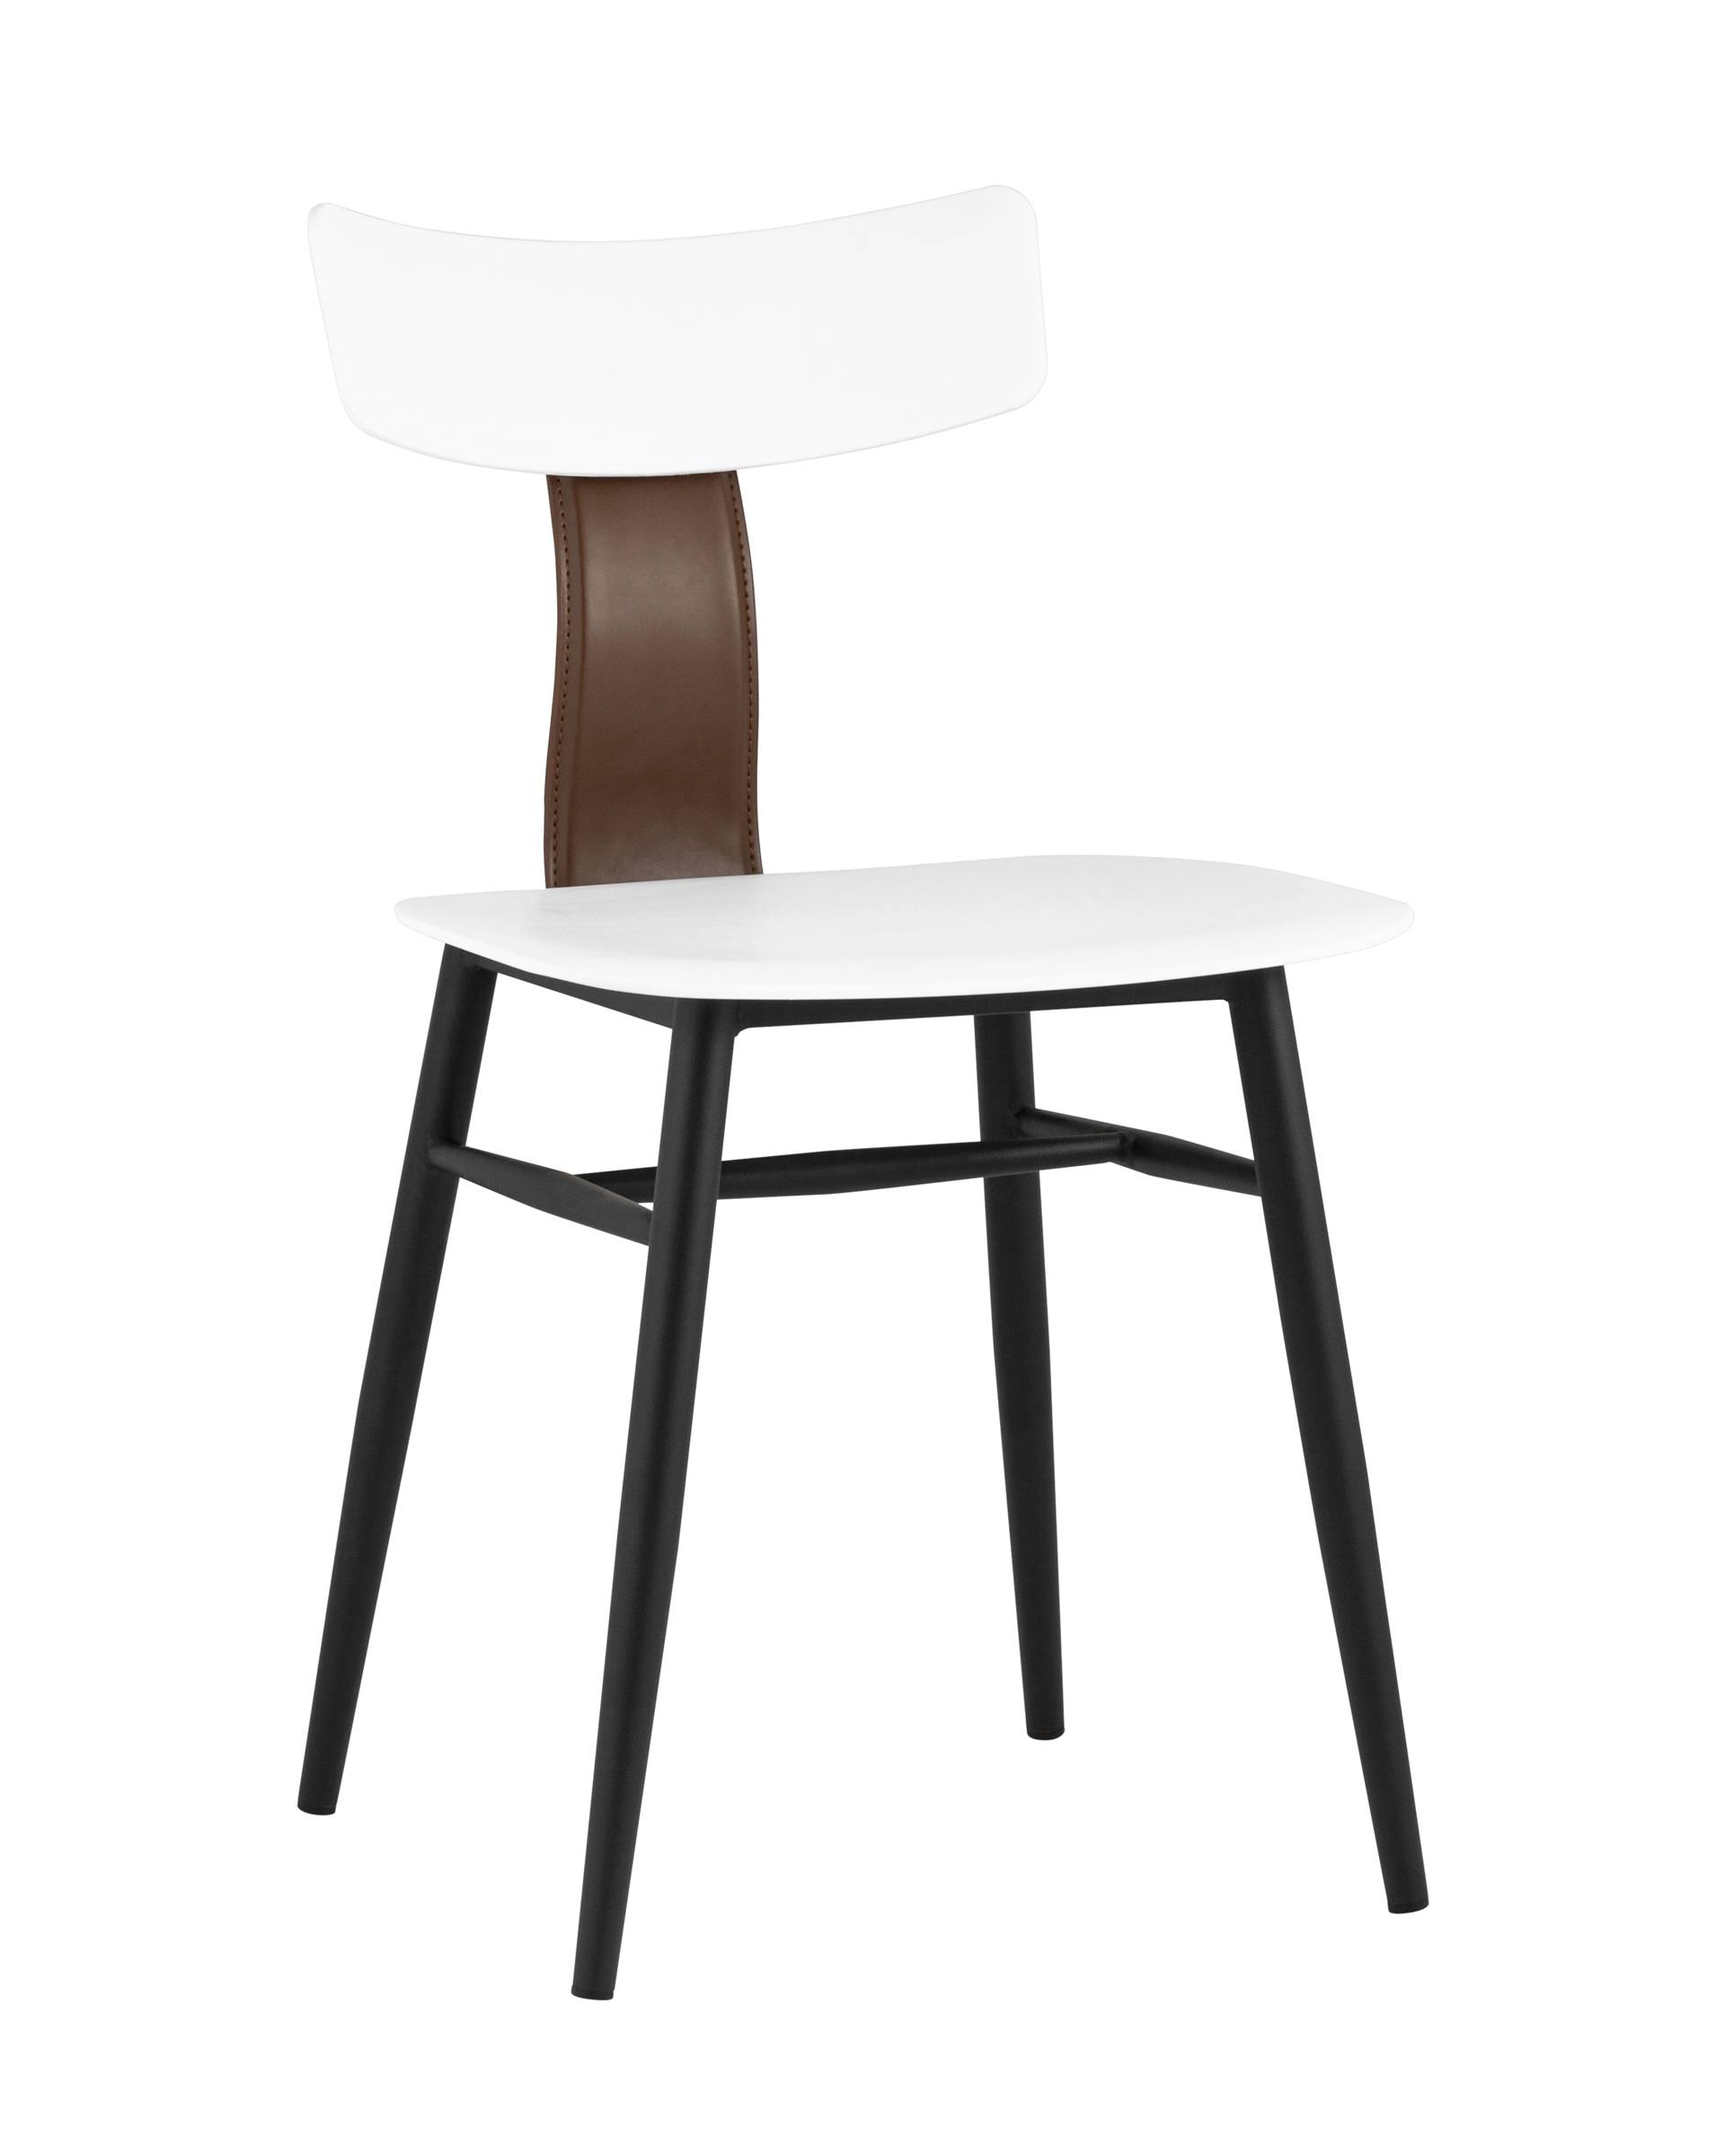   Stool Group Ant 000025447